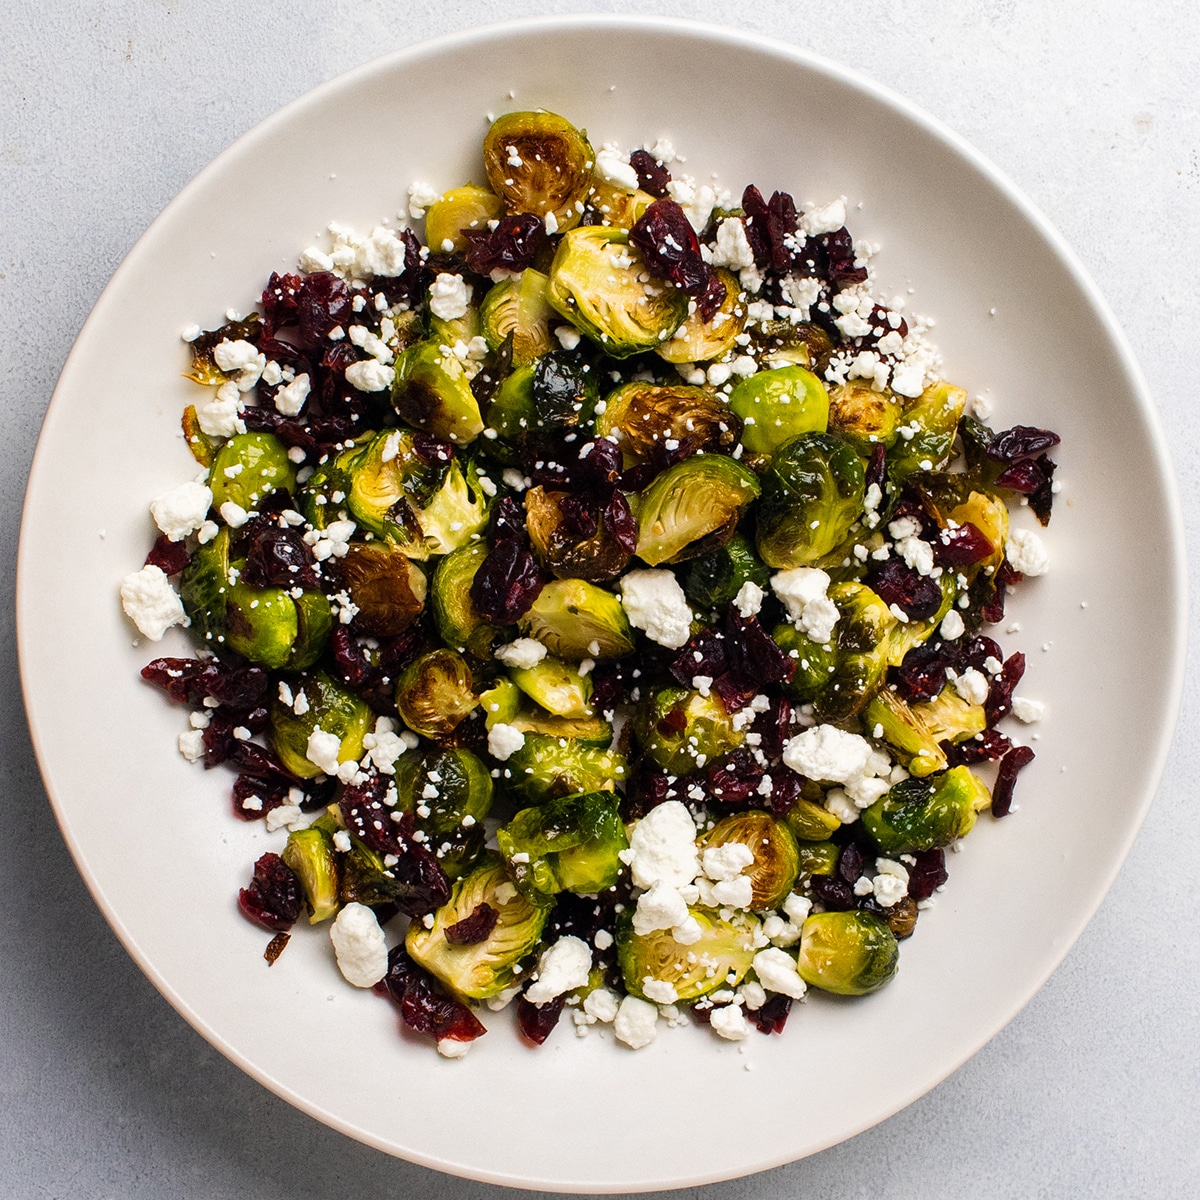 Maple Roasted Brussels Sprouts with Dried Cranberries and Goat Cheese - Life as a Strawberry